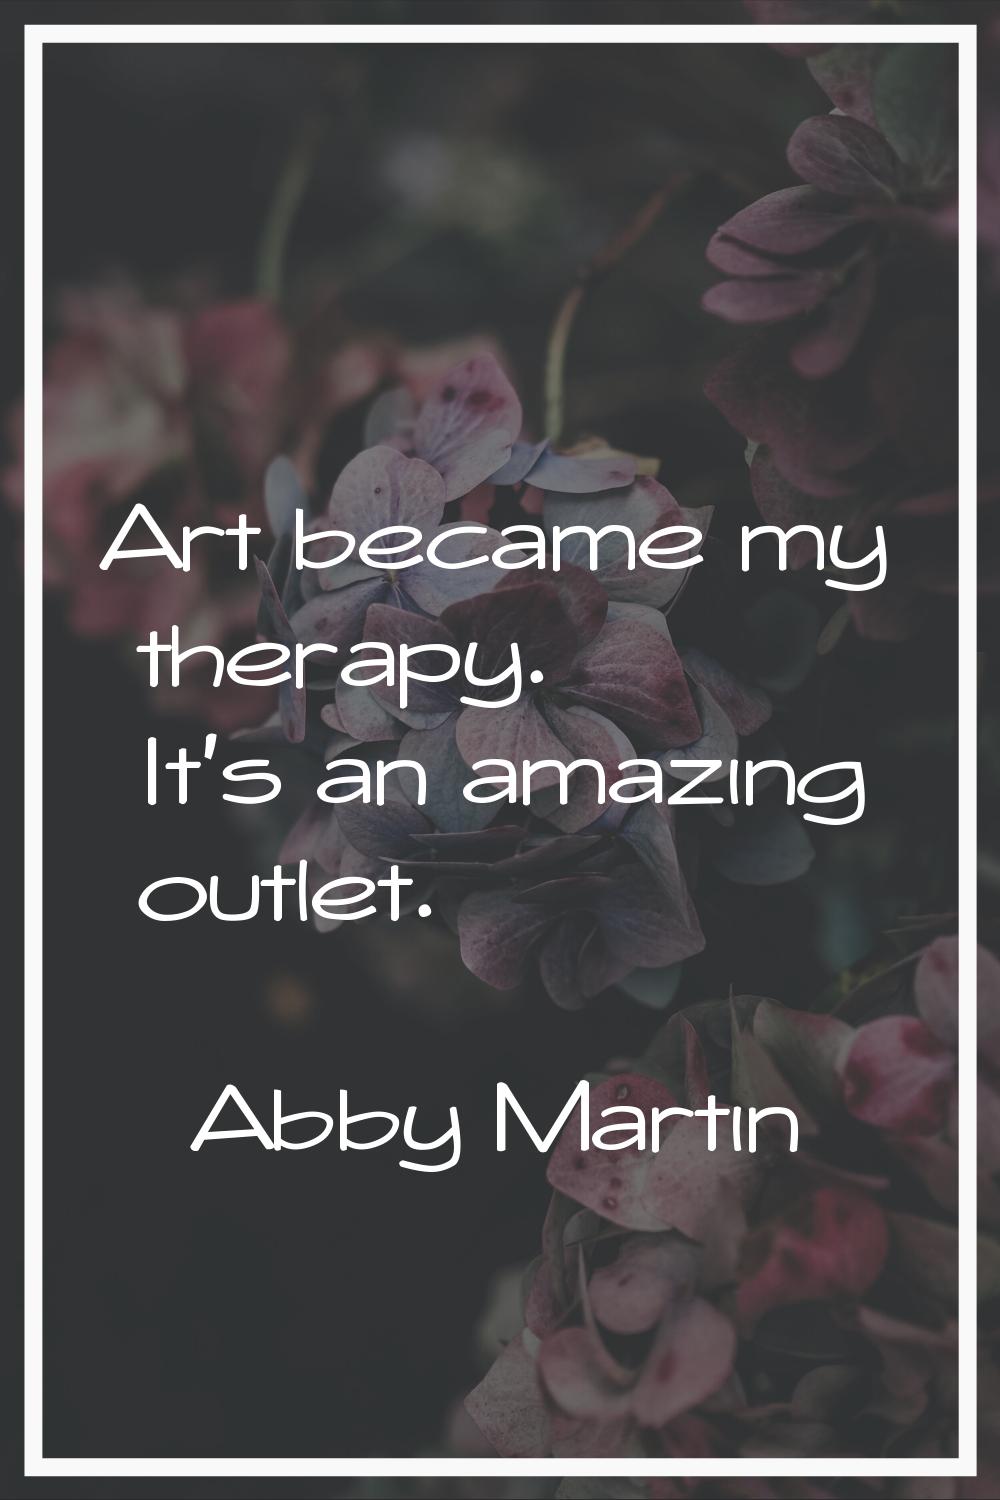 Art became my therapy. It's an amazing outlet.